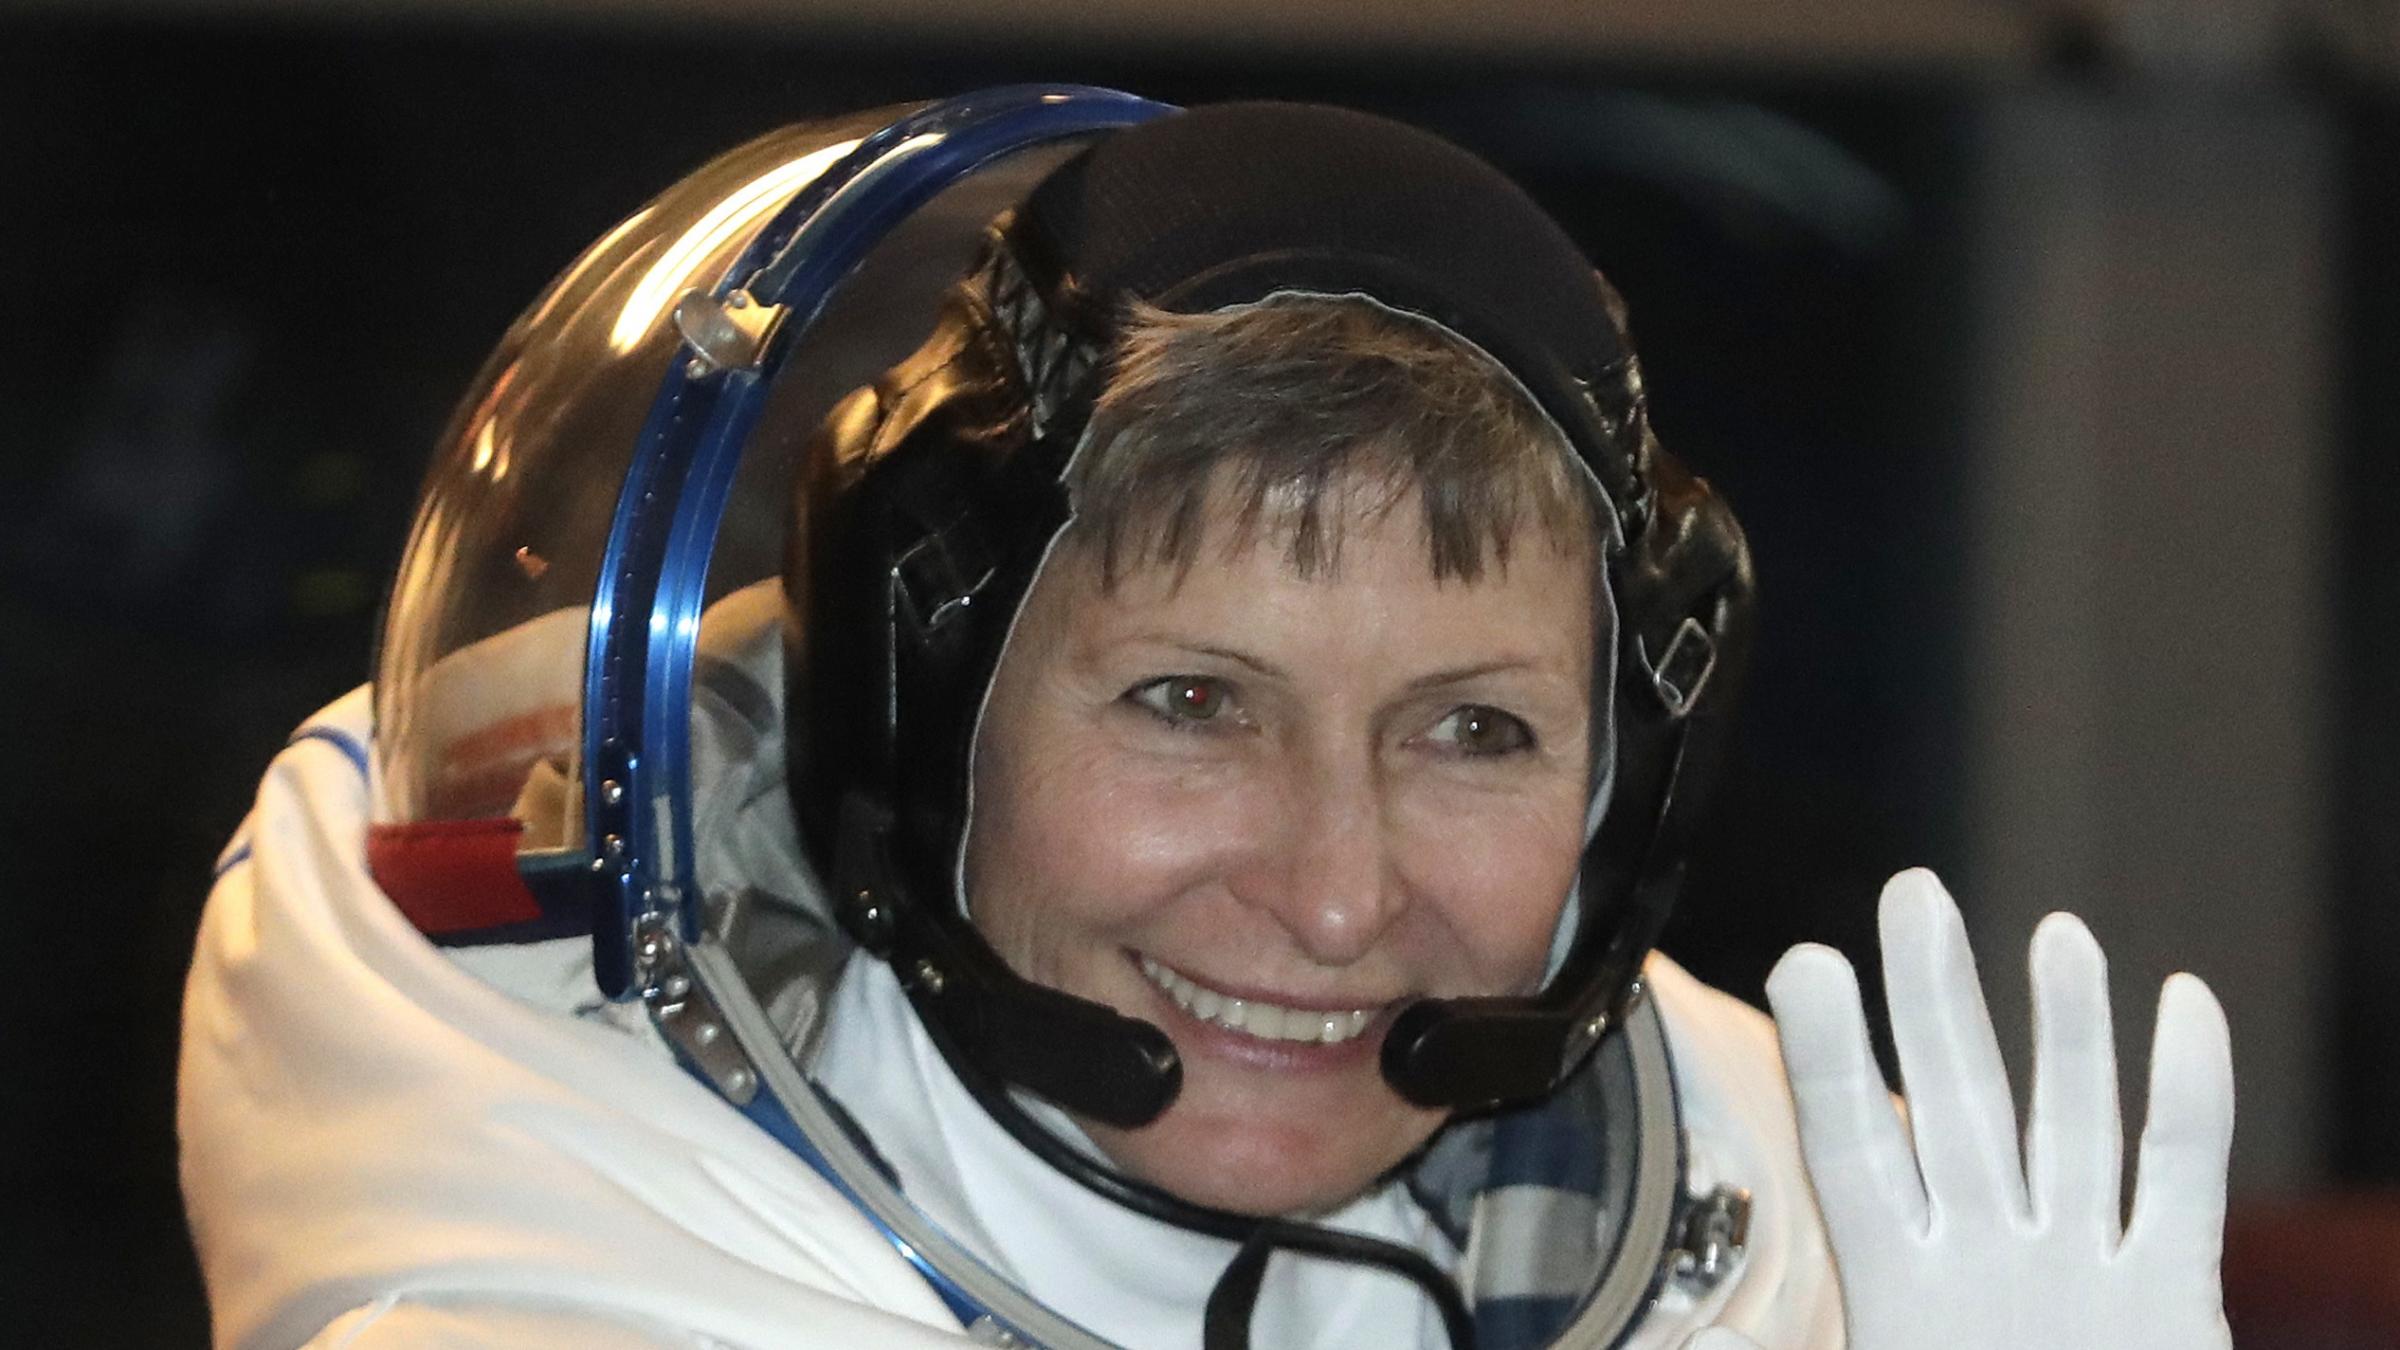 Record-breaking astronaut Peggy Whitson hails a wee triumph - Ealing Times